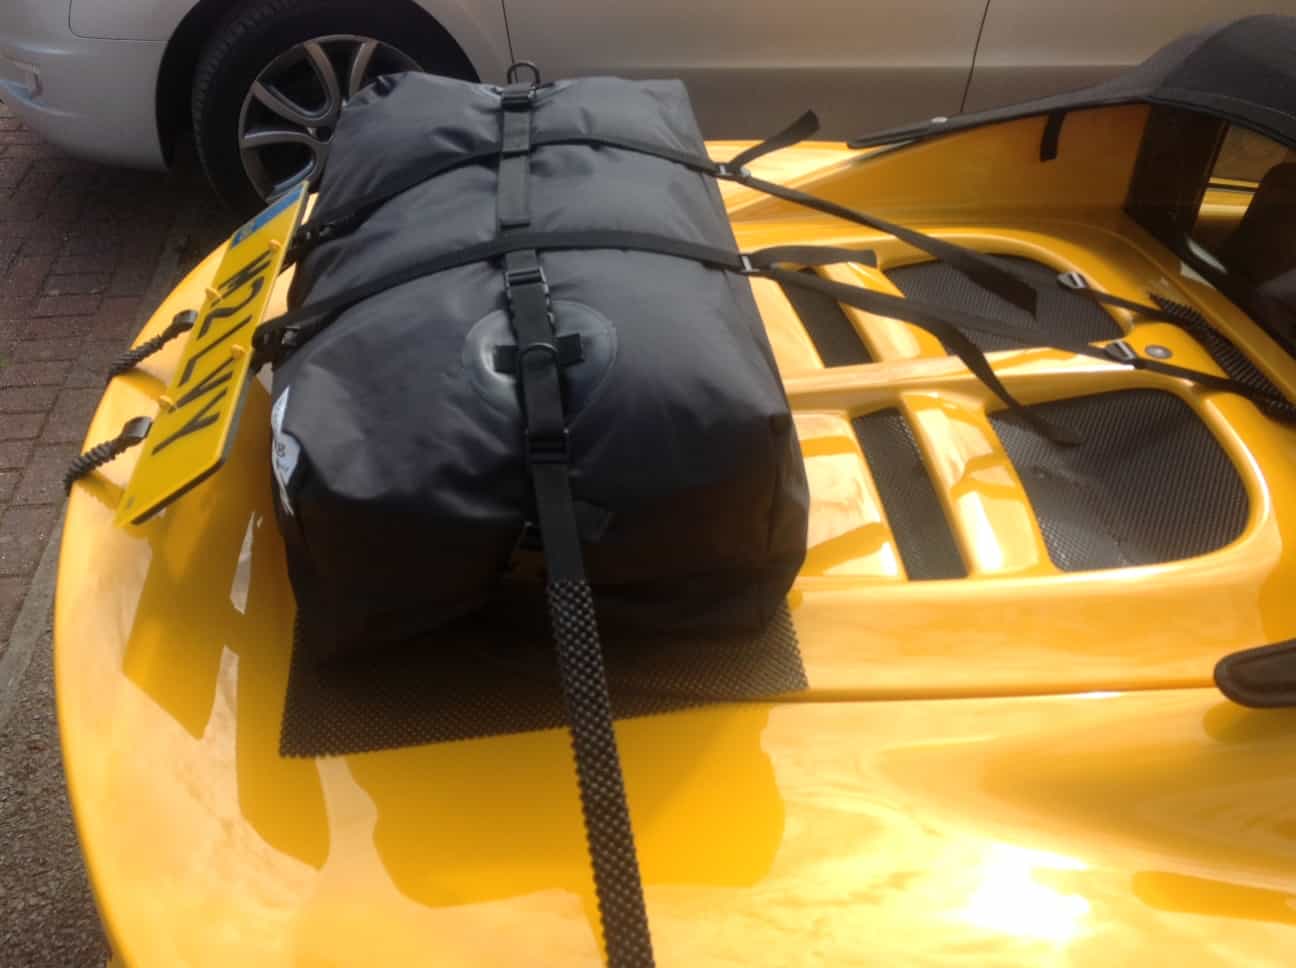 aerial view of a boot-bag original luggage rack fitted to a yellow s1 lotus elise